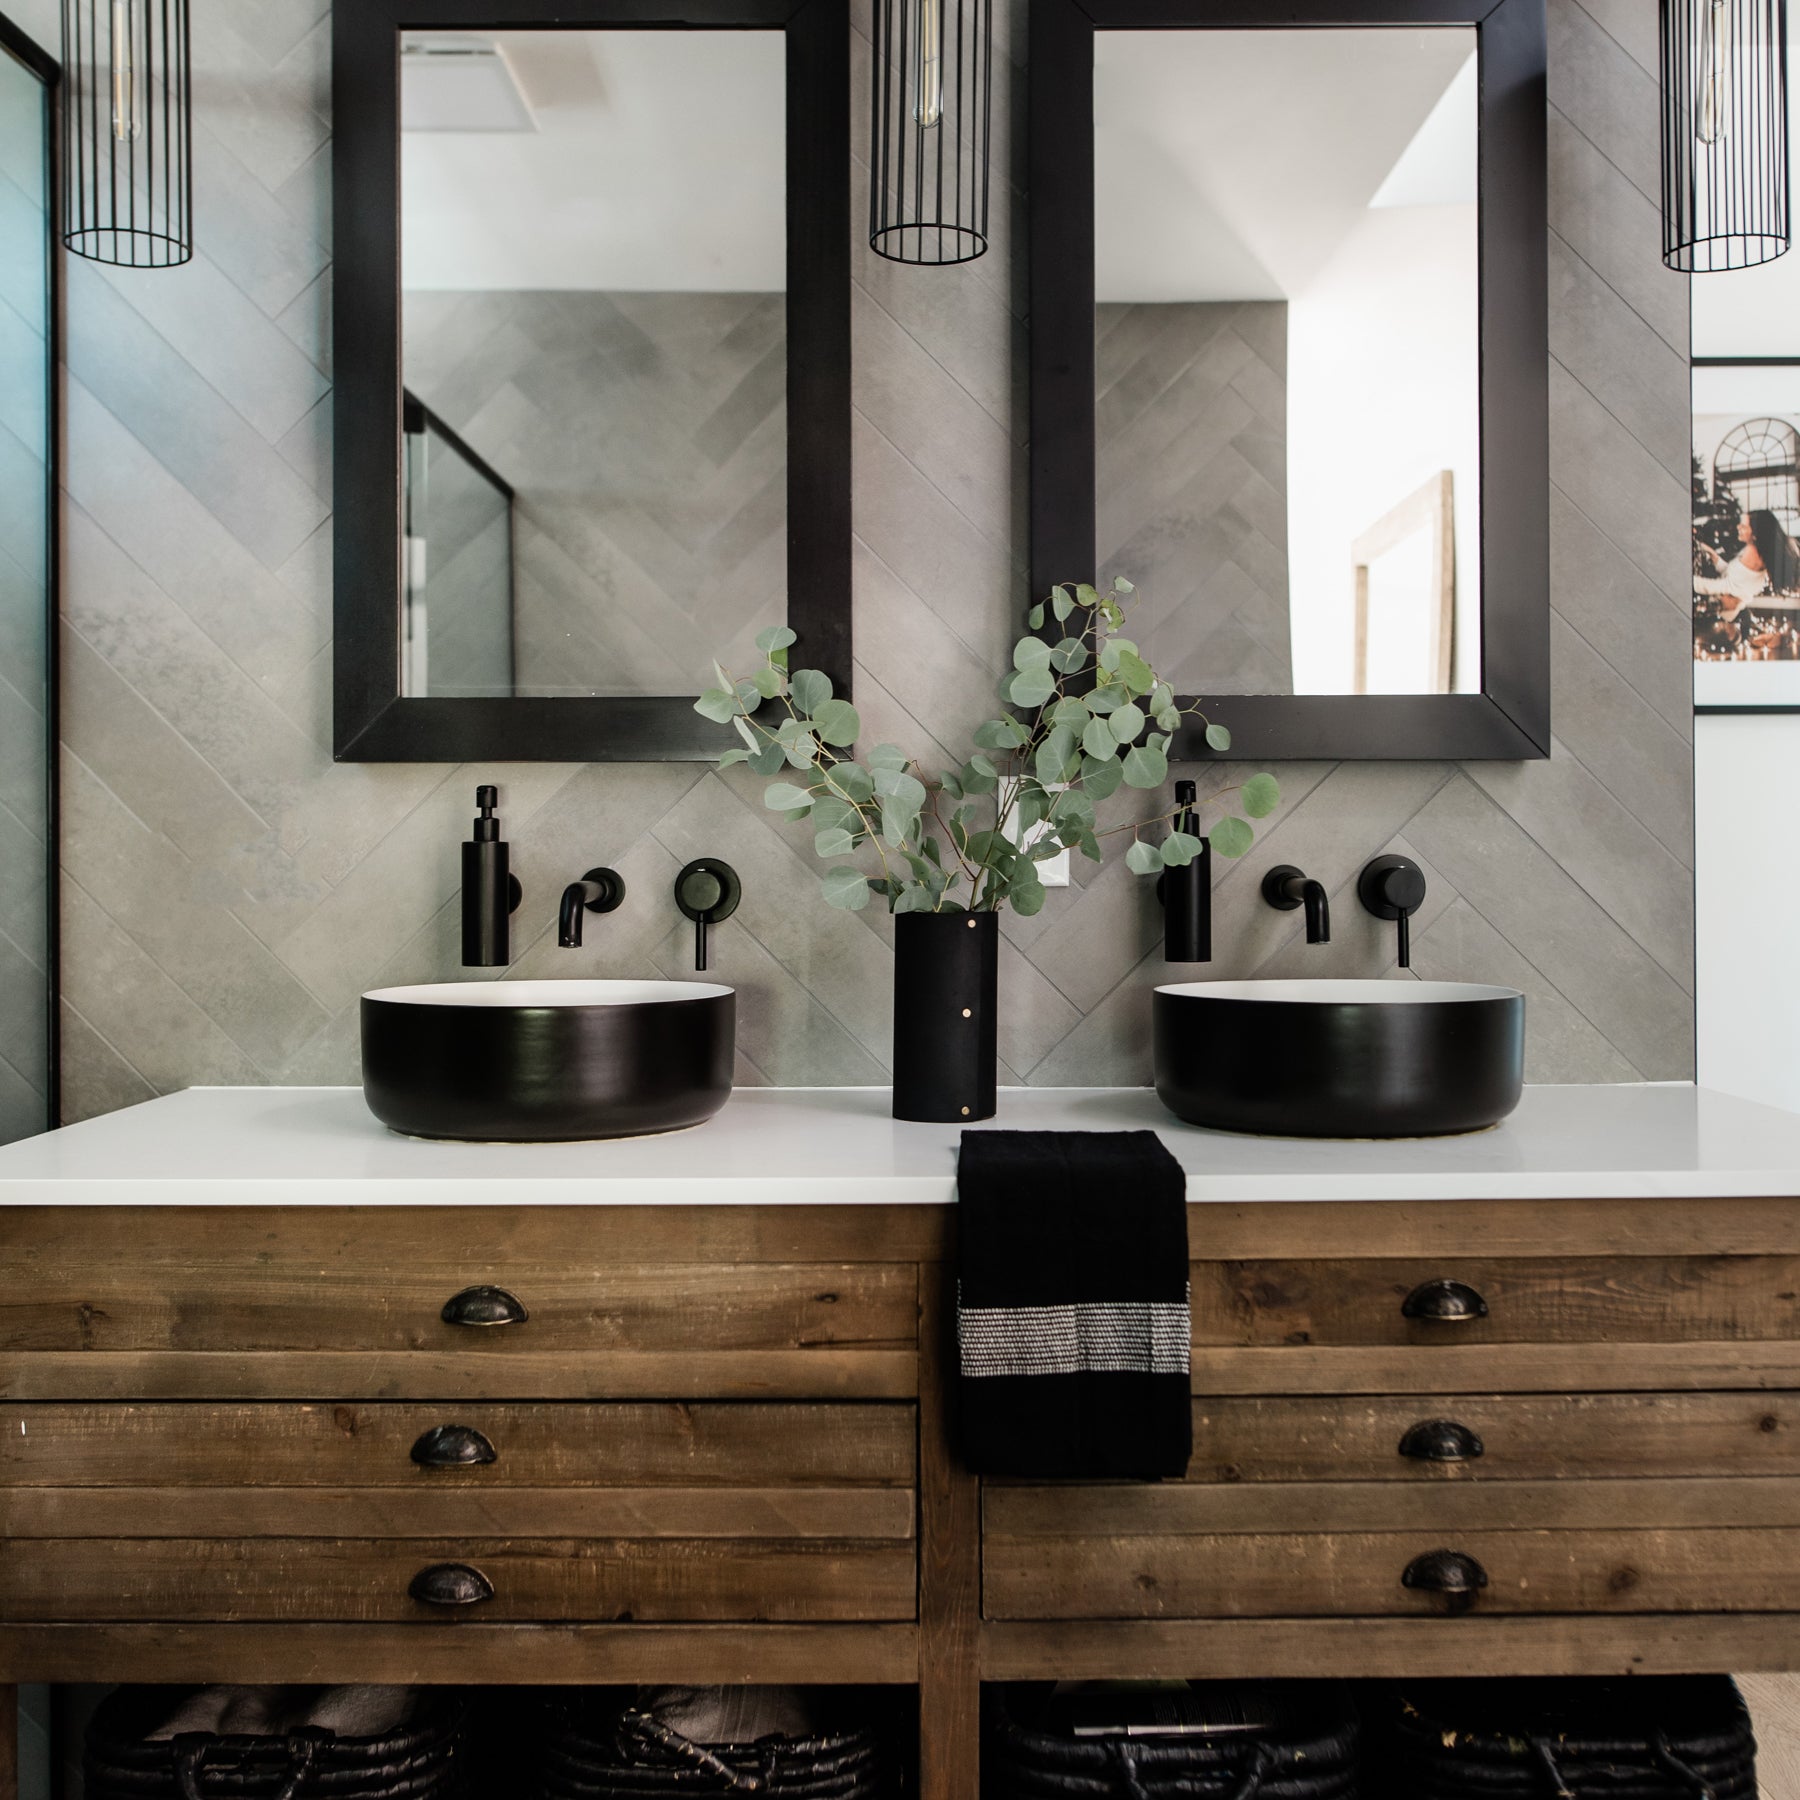 A bathroom vanity with a black leather-wrapped vase, a black cotton hand towel.